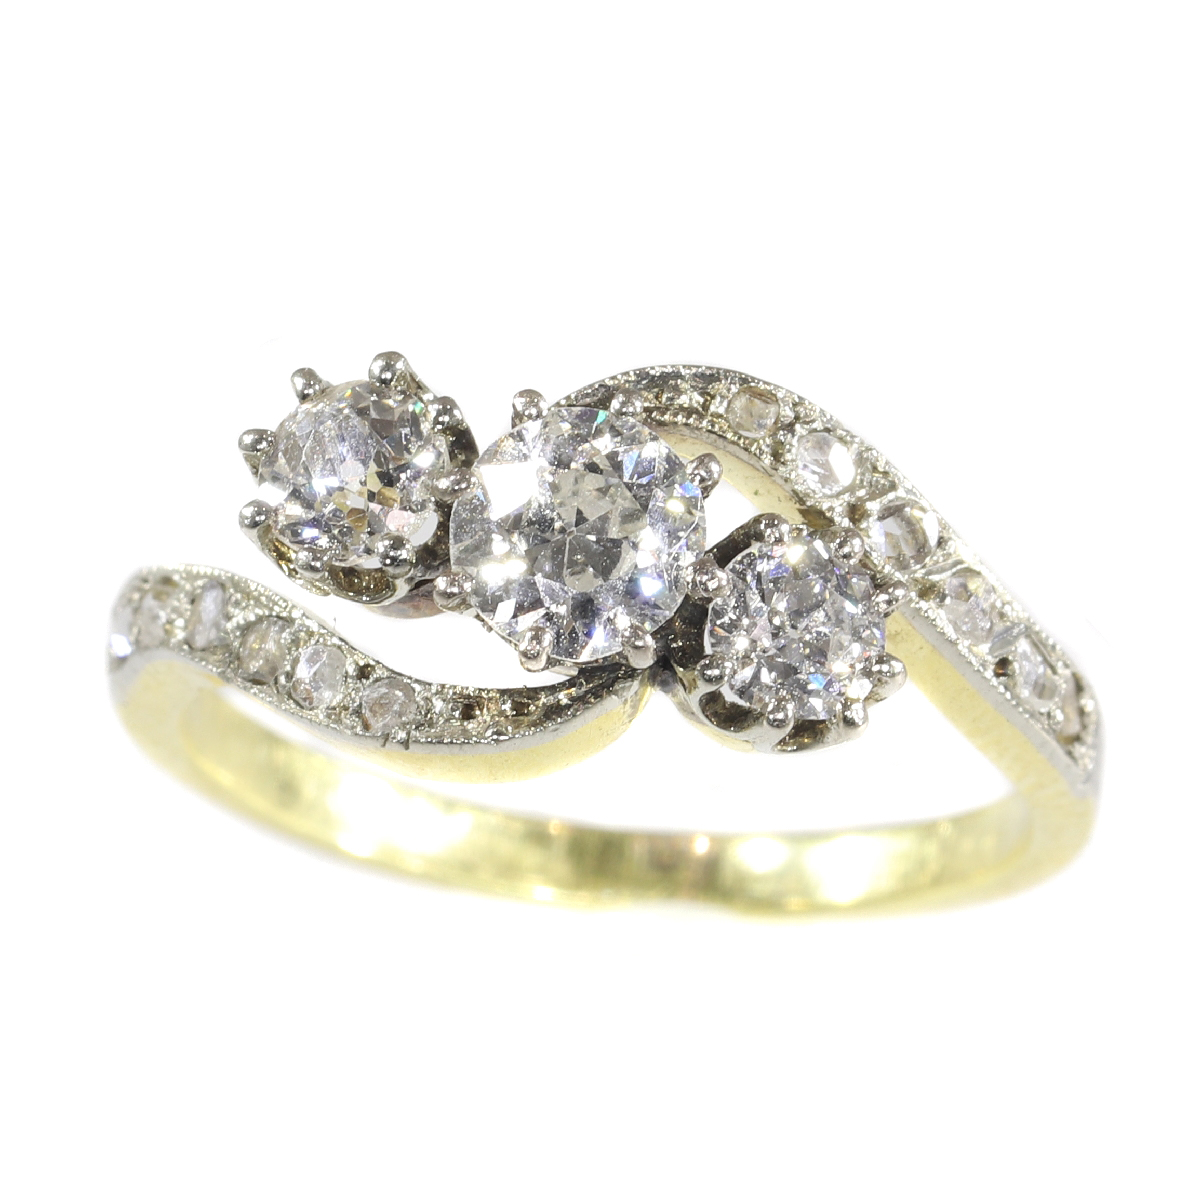 Victorian diamond cross-over ring engagement ring